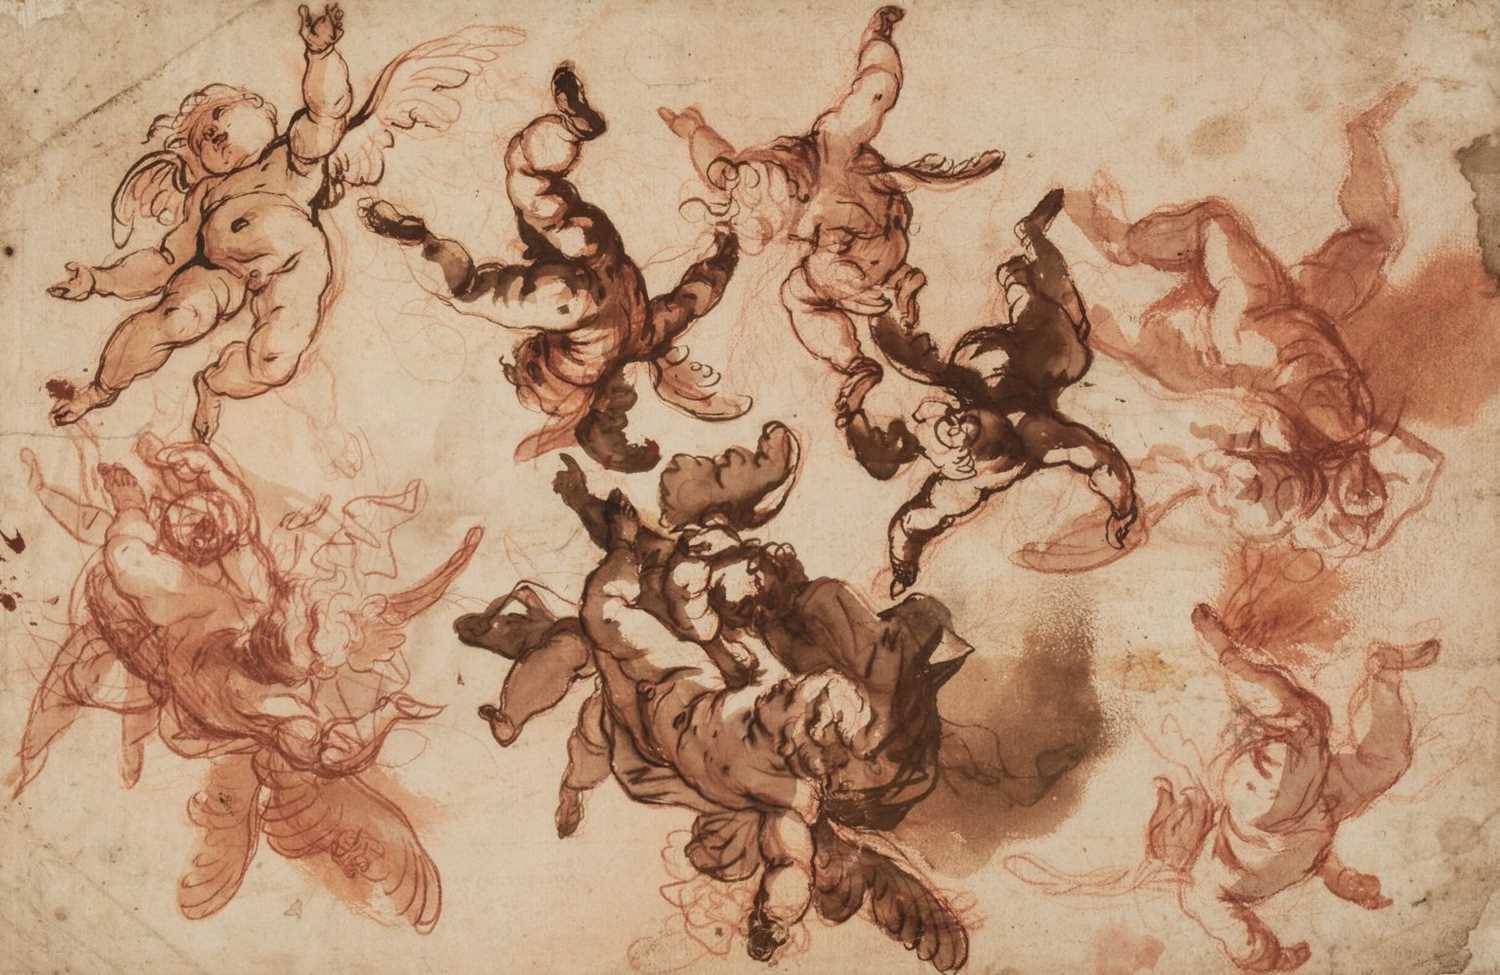 17 - Piola (Domenico, 1627-1703). Studies of Putti in Flight, pen and ink and wash